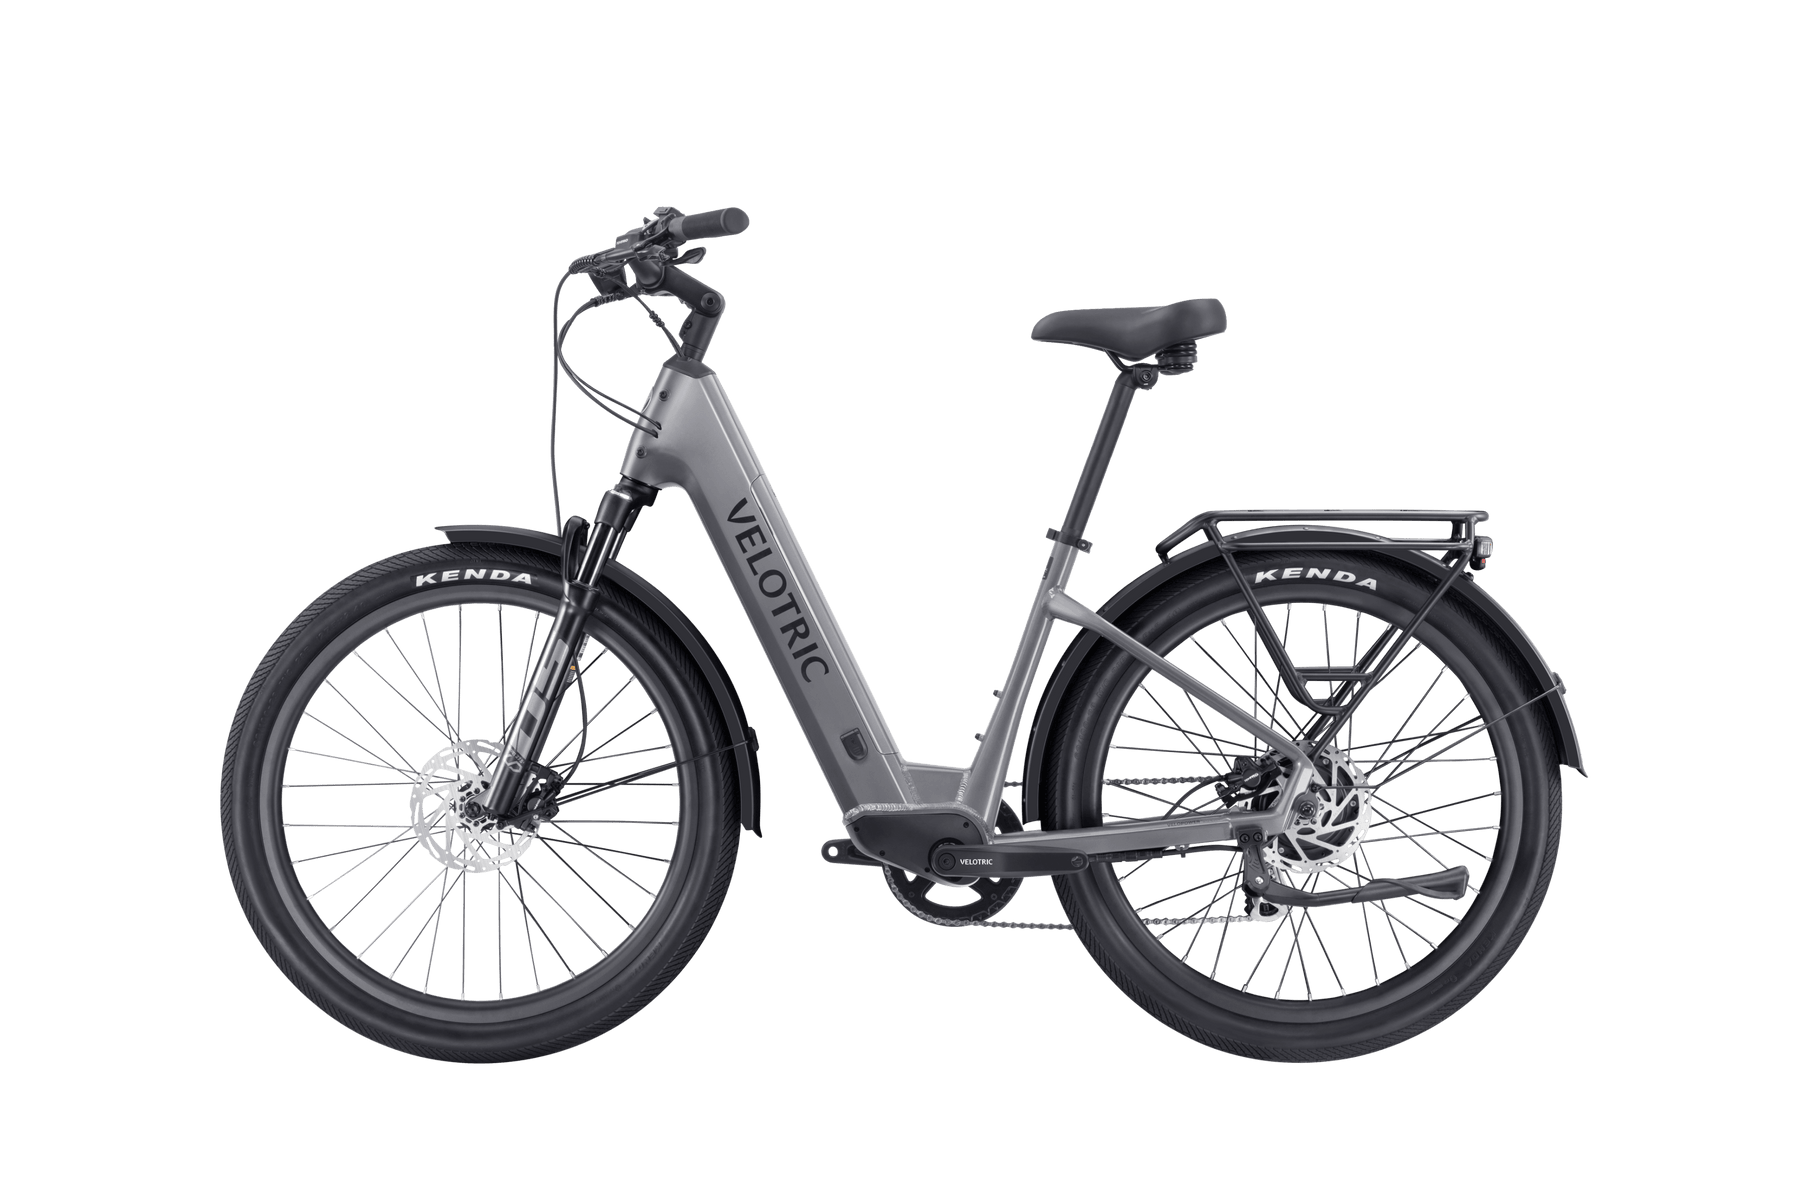 Velotric Discover 2 electric bicycle with a step-through frame and front suspension displayed against a black background.